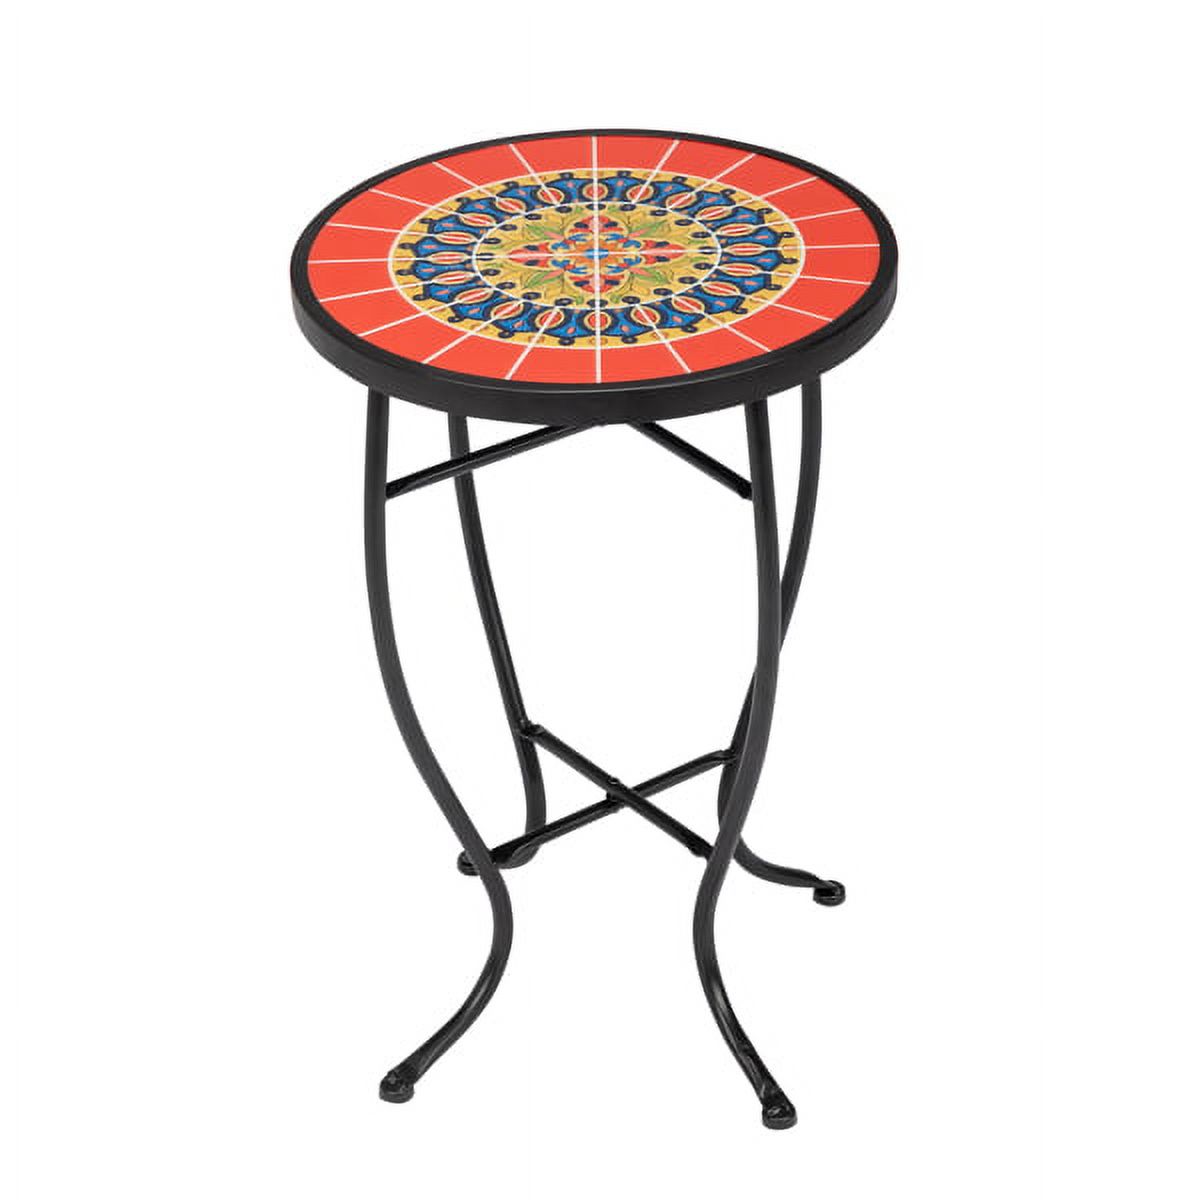 Outdoor Side Table, End Table Patio Side Table with Glass Top Round Balcony Coffee Table Porch Indoor Glass Top, Sun Patio Side Table,Metal Glass End Table for Porch Garden Yard Pool, Red Mandala - image 1 of 7